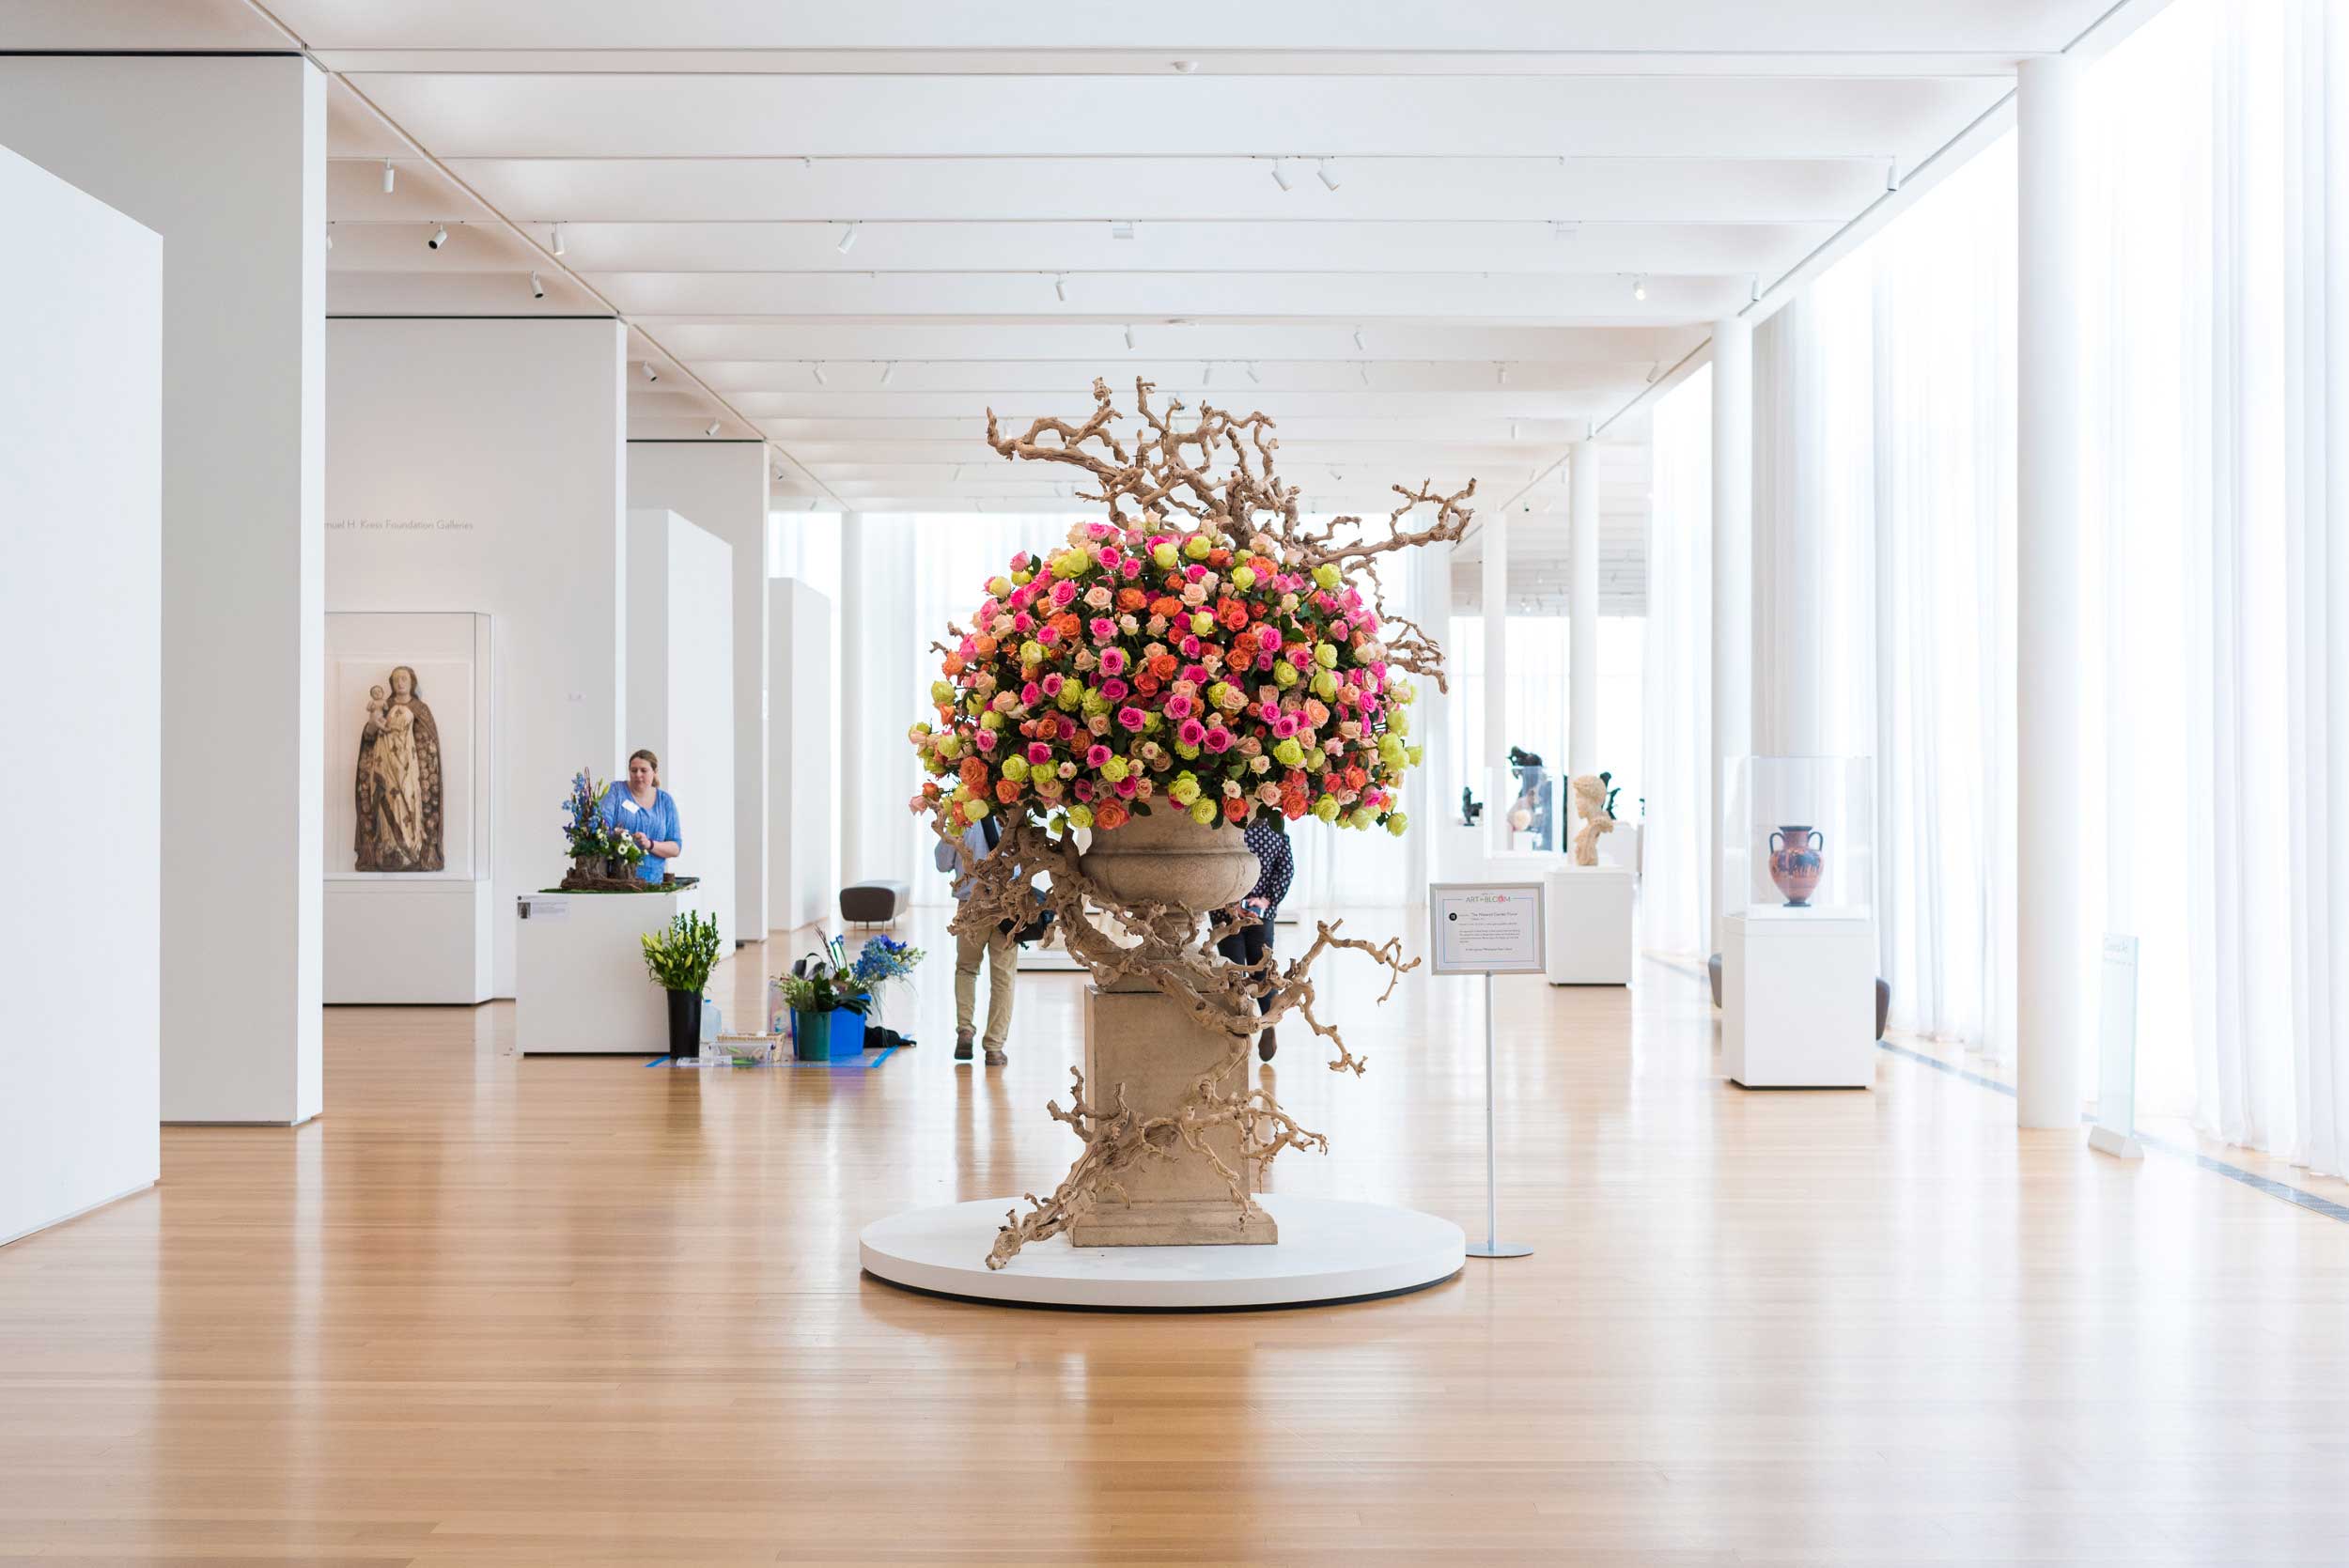 View of large colorful floral arrangement in the North Carolina Museum of Art lobby